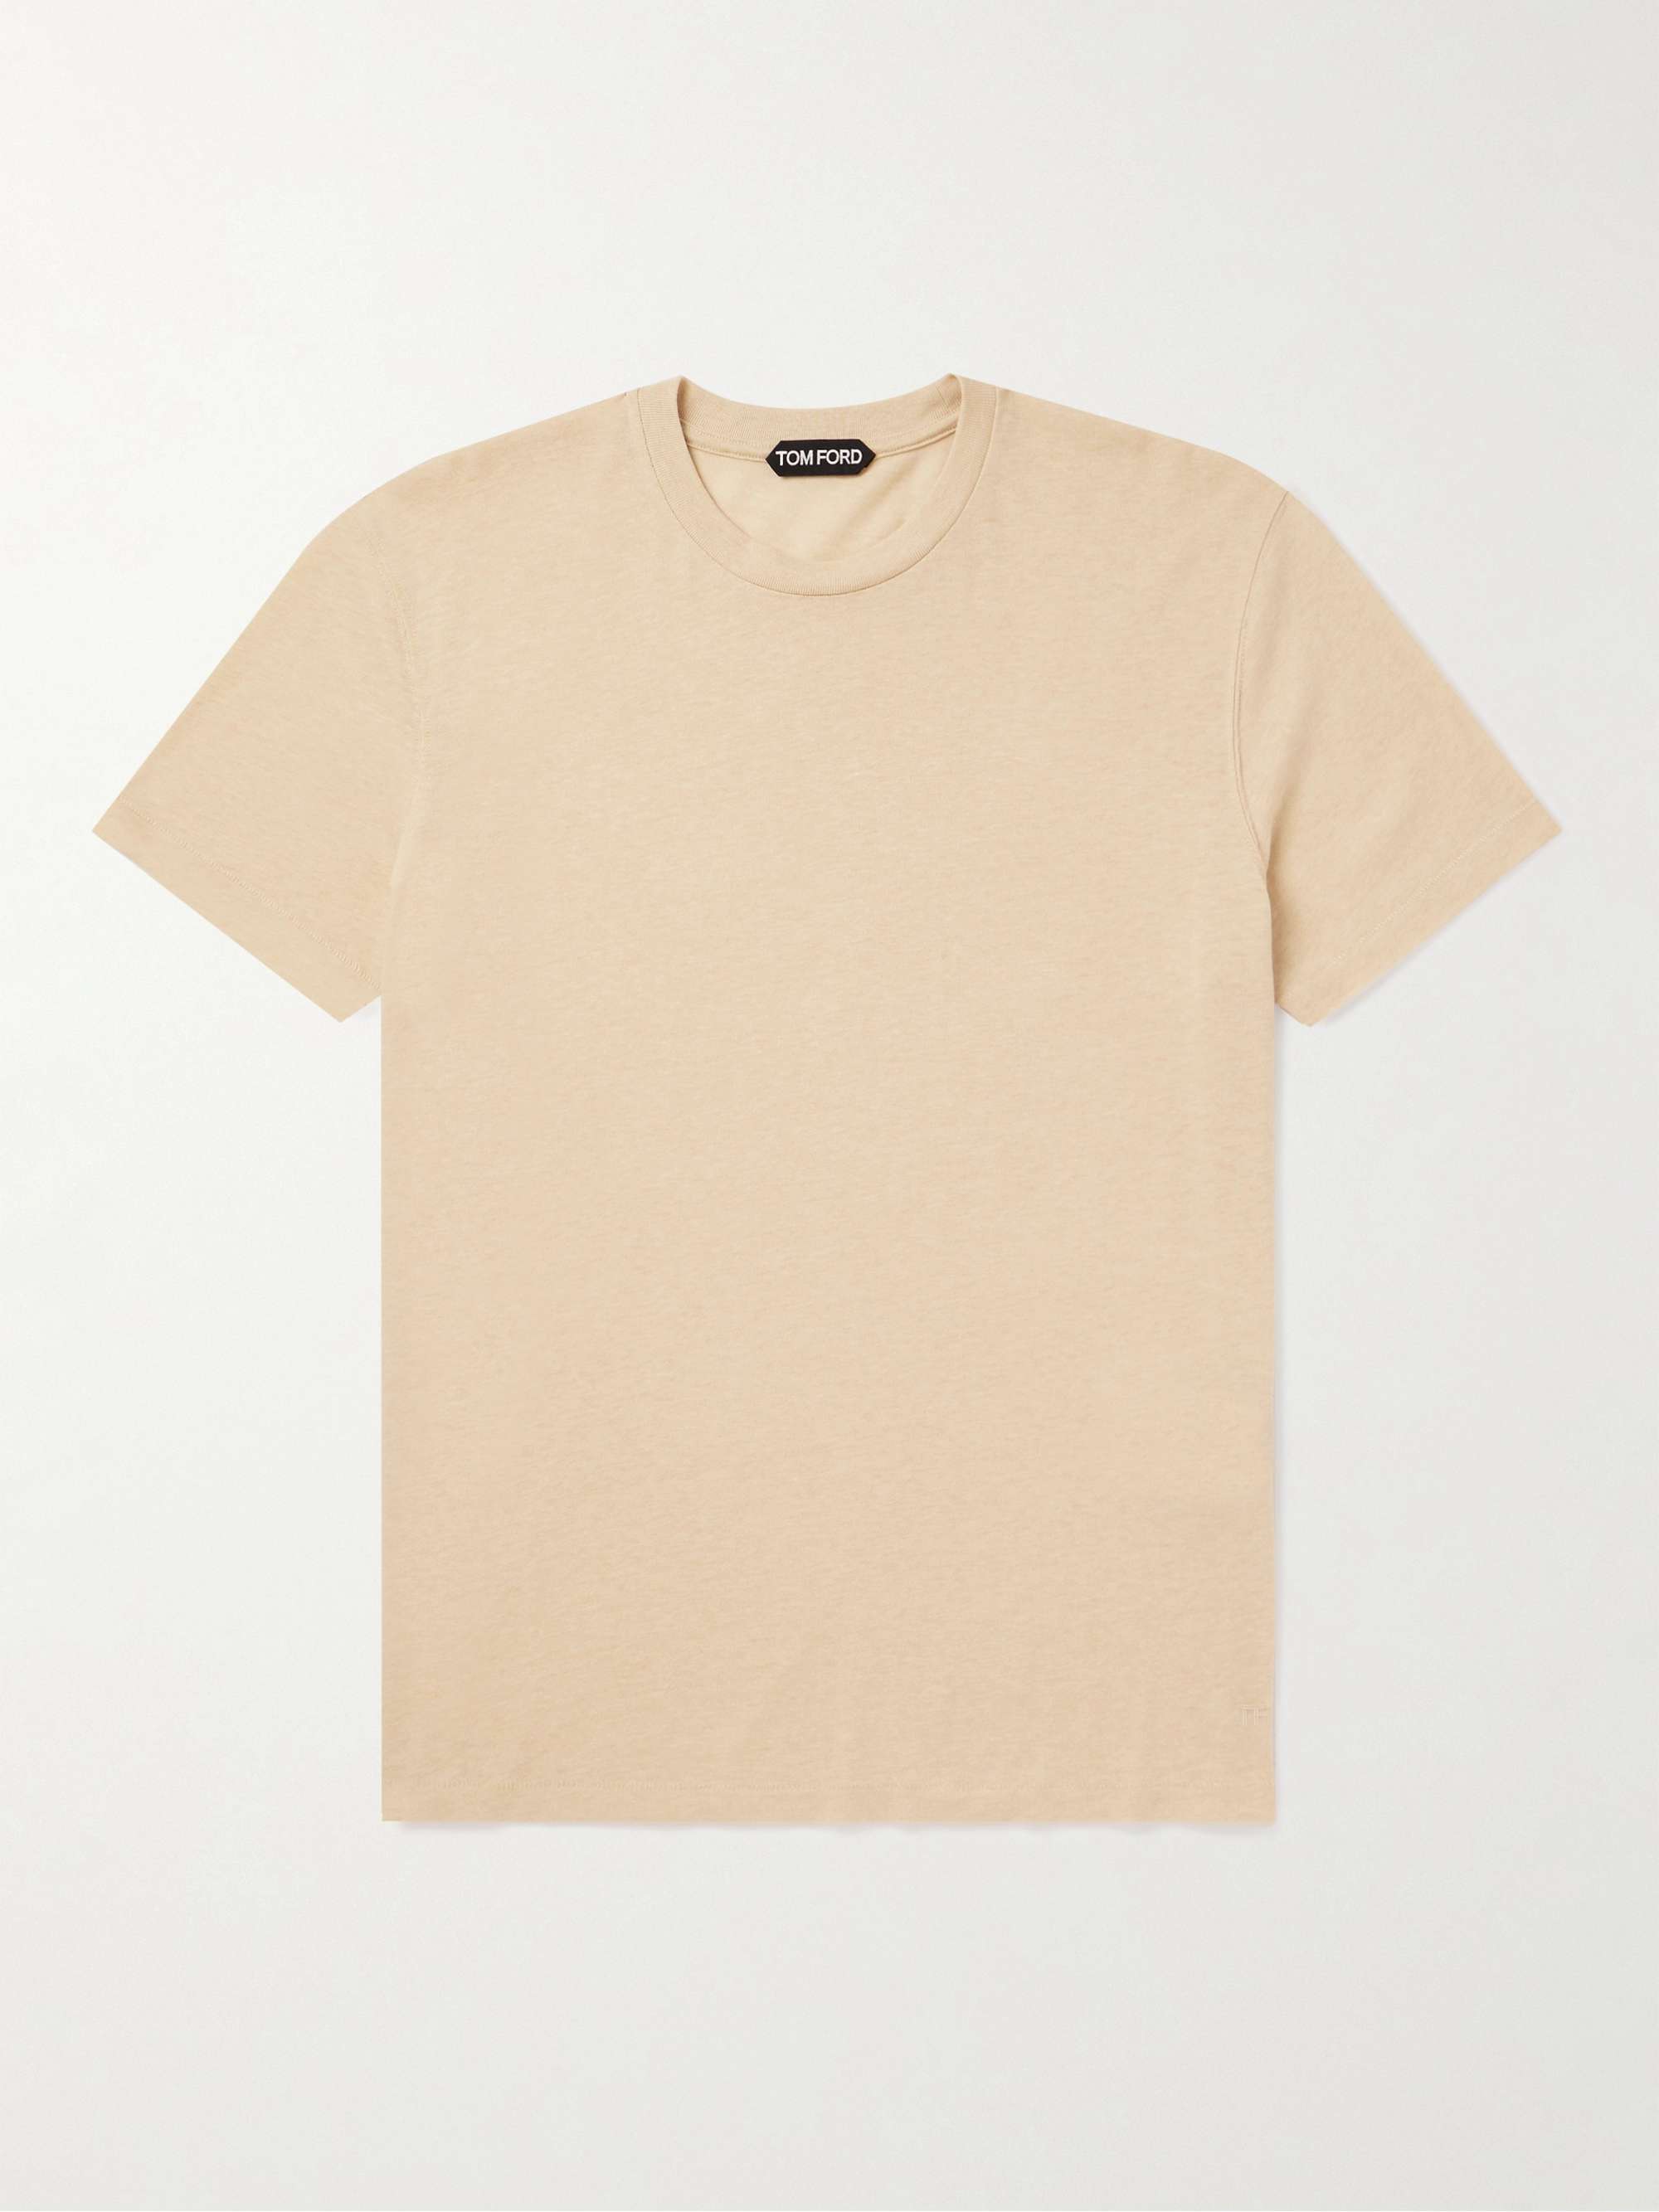 Tom Ford logo-embroidered Cotton-Blend Jersey T-Shirt - Men - Beige T-shirts - S